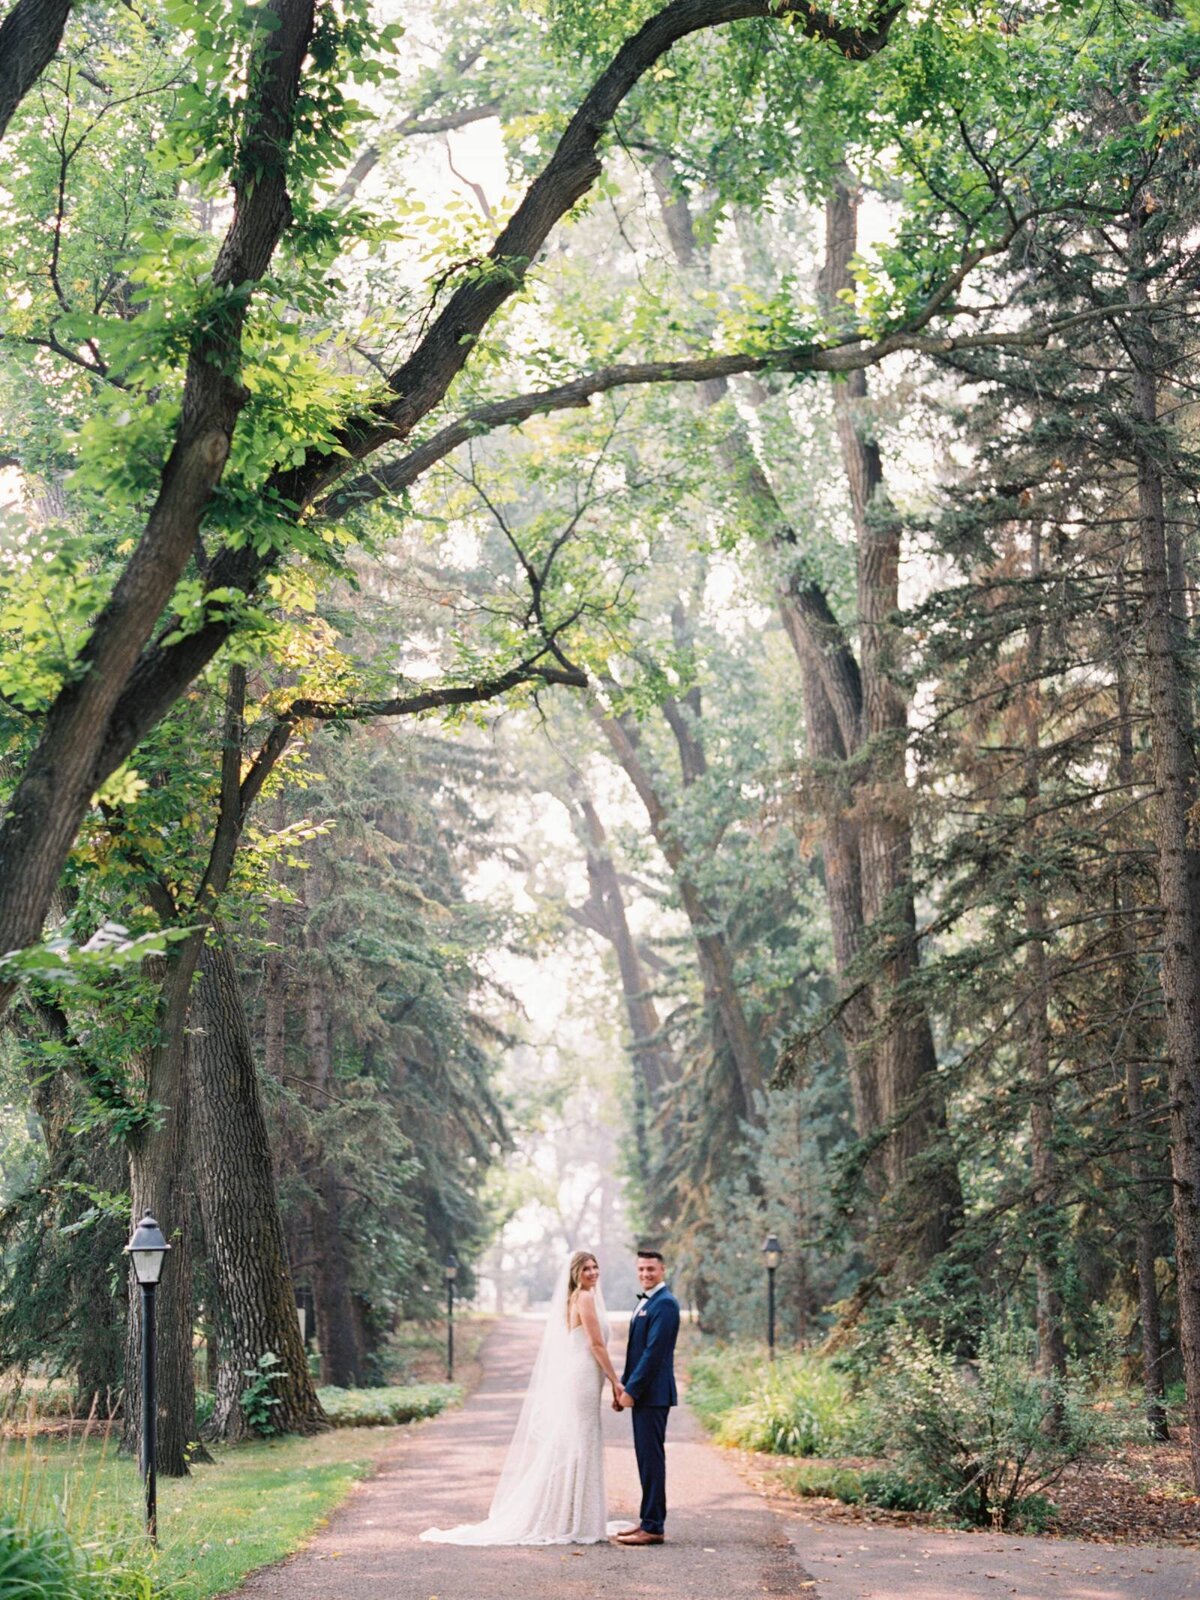 Bride and groom on the tree lined path at The Norland Historic Estate, a classic vintage wedding venue in Lethbridge, AB, featured on the Brontë Bride Vendor Guide.